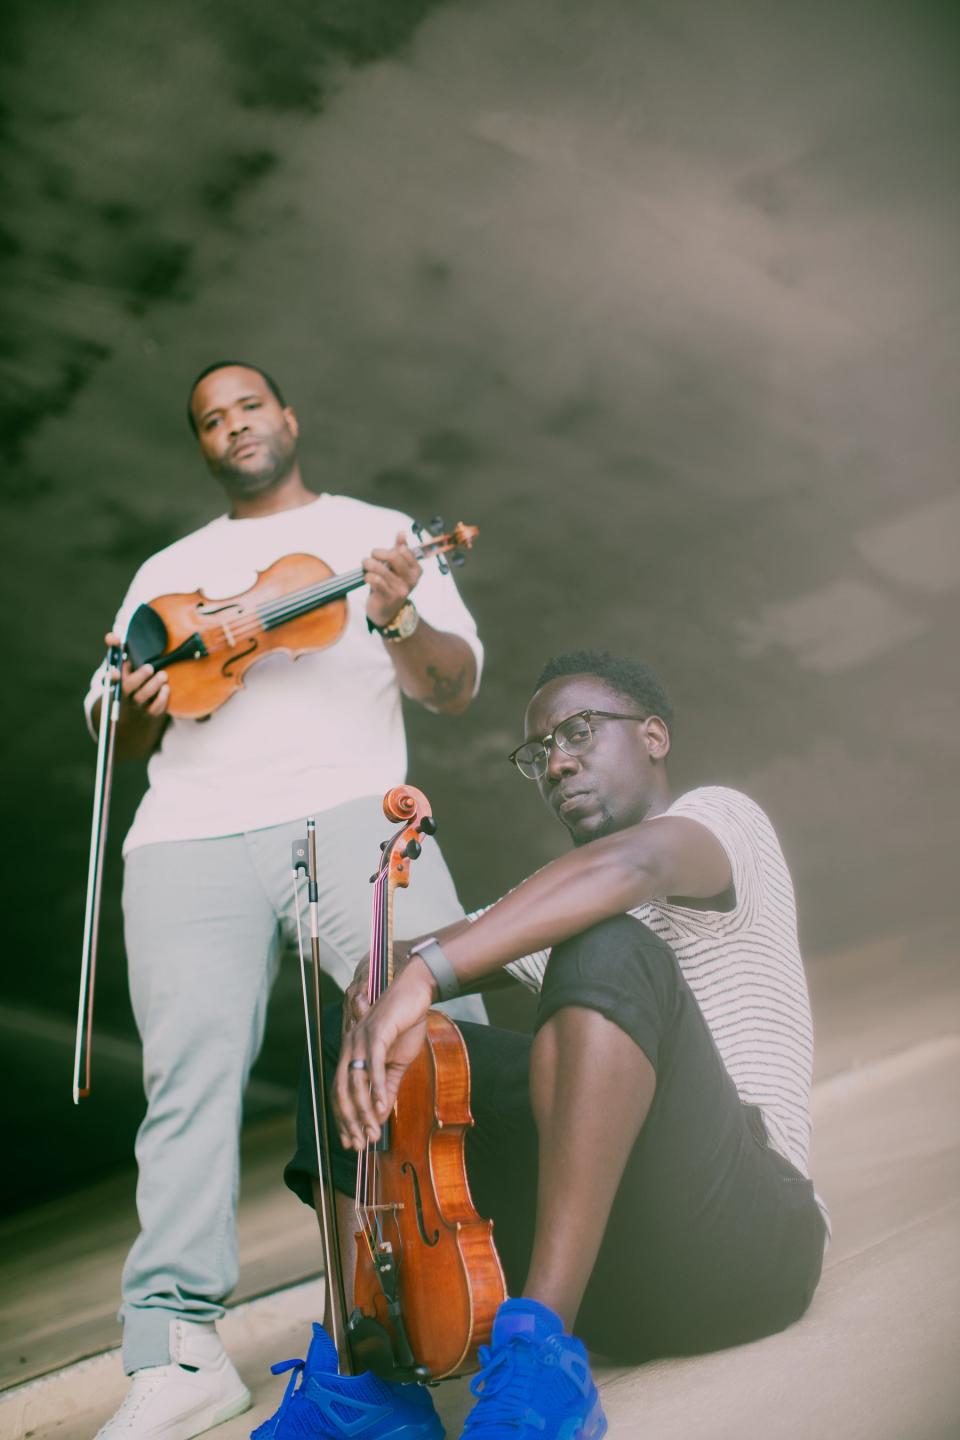 Black Violin invites audiences to experience their unique sound during their national tour, which will stop on Sunday at the Ohio Theatre.